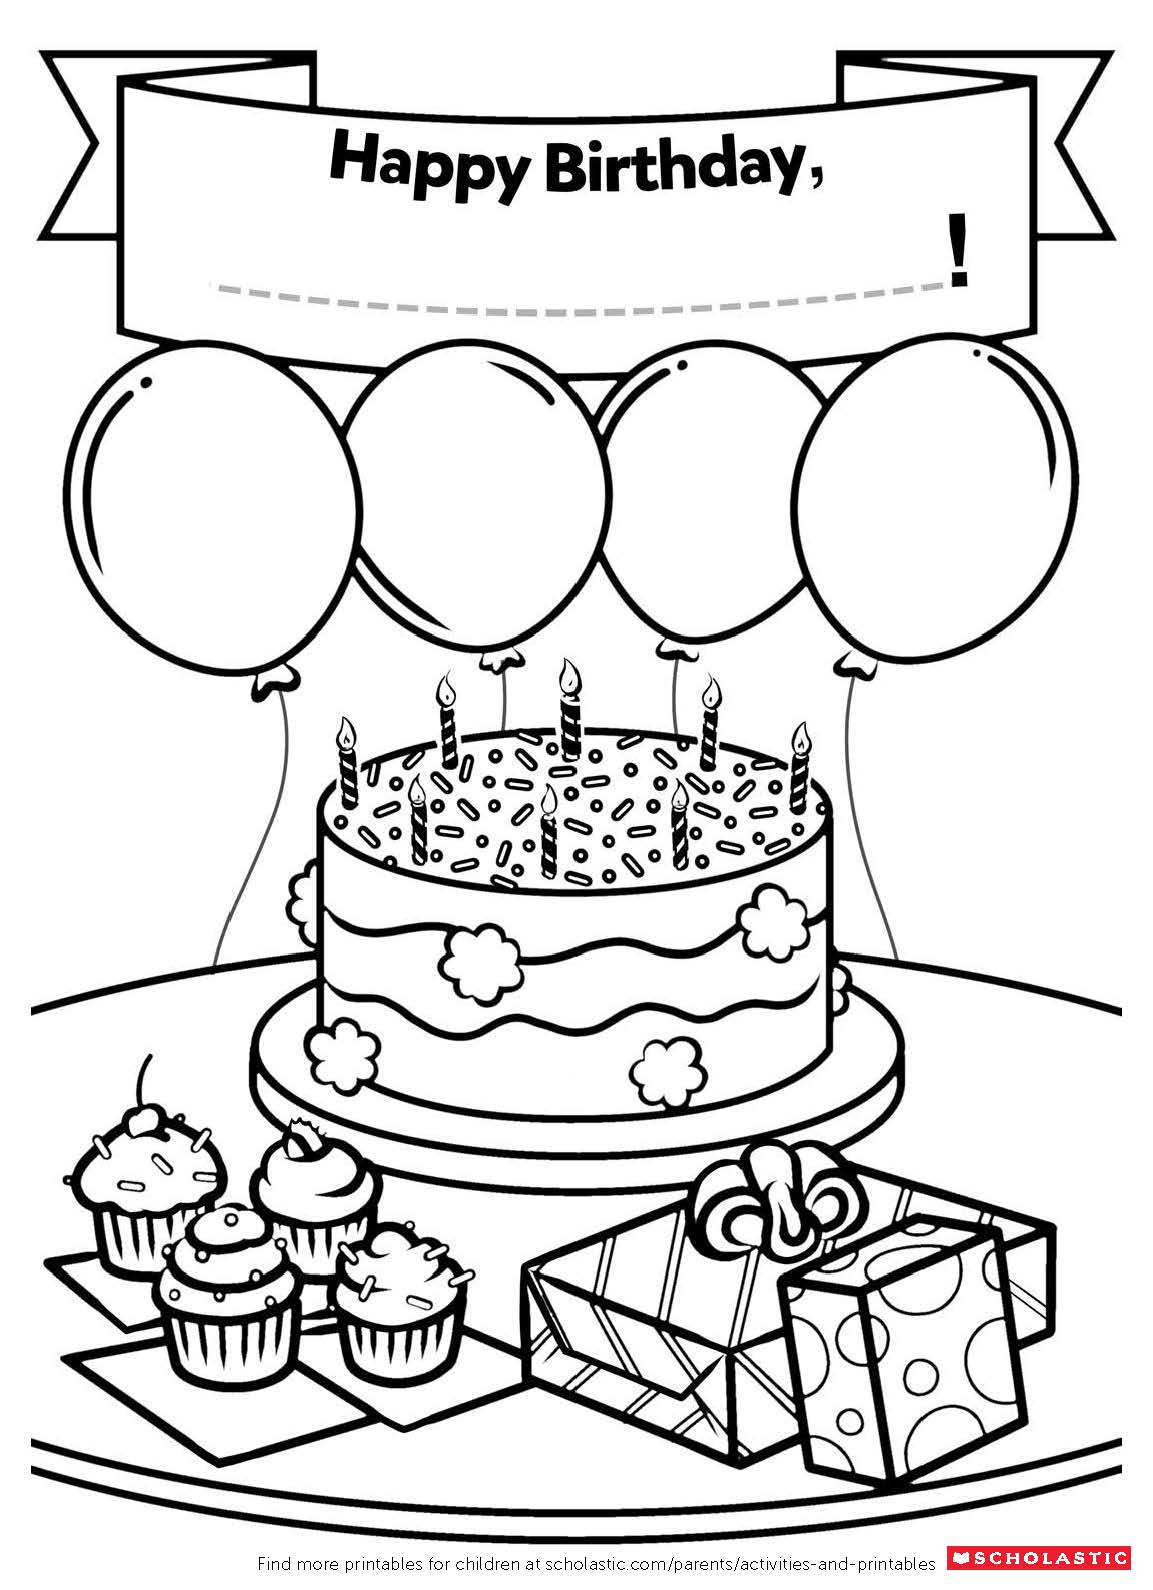 A Homemade Birthday Card Worksheets and Printables